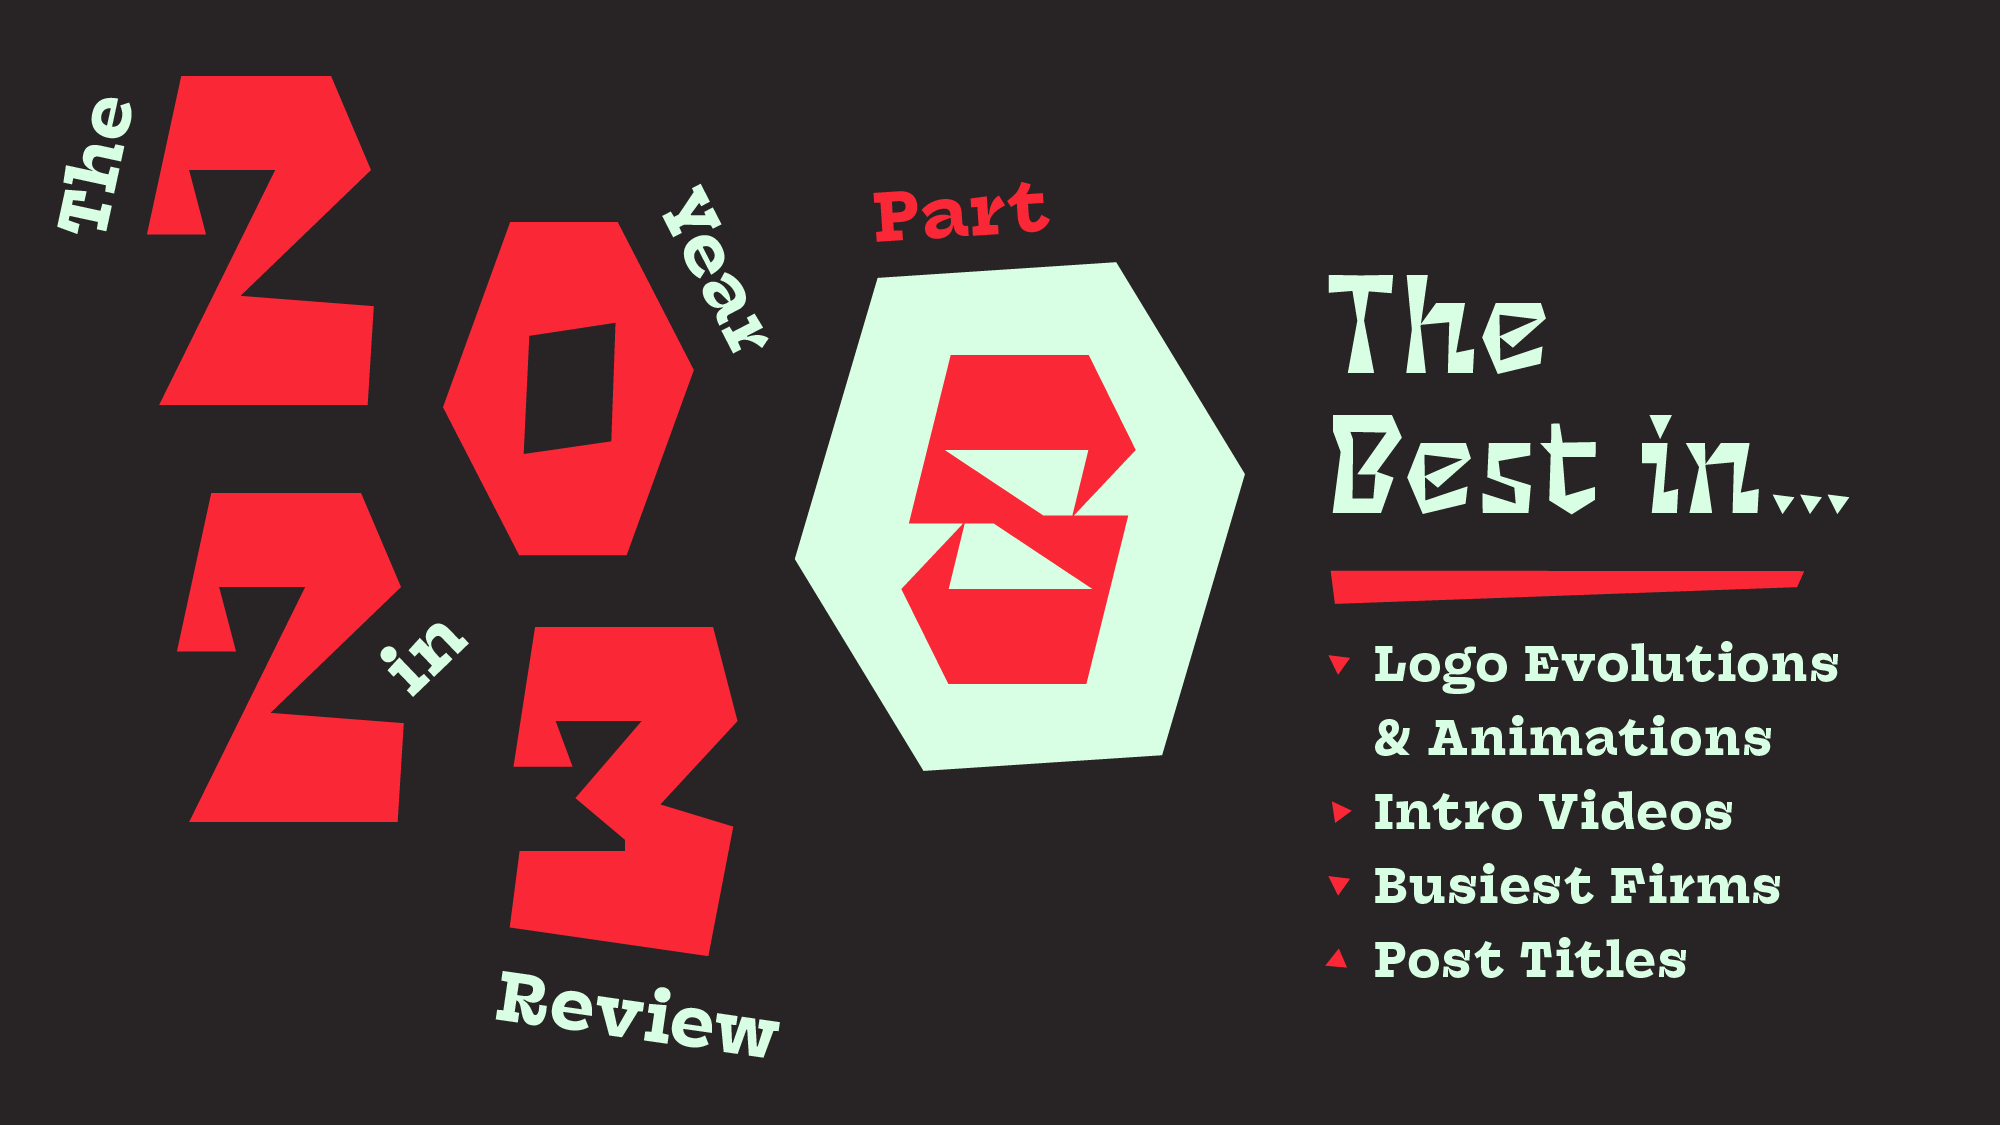 The Year in Review Part 8: The Best in Logo Evolutions, Logo Animations, Introduction Videos, Most Posted Firms, and Post Titles